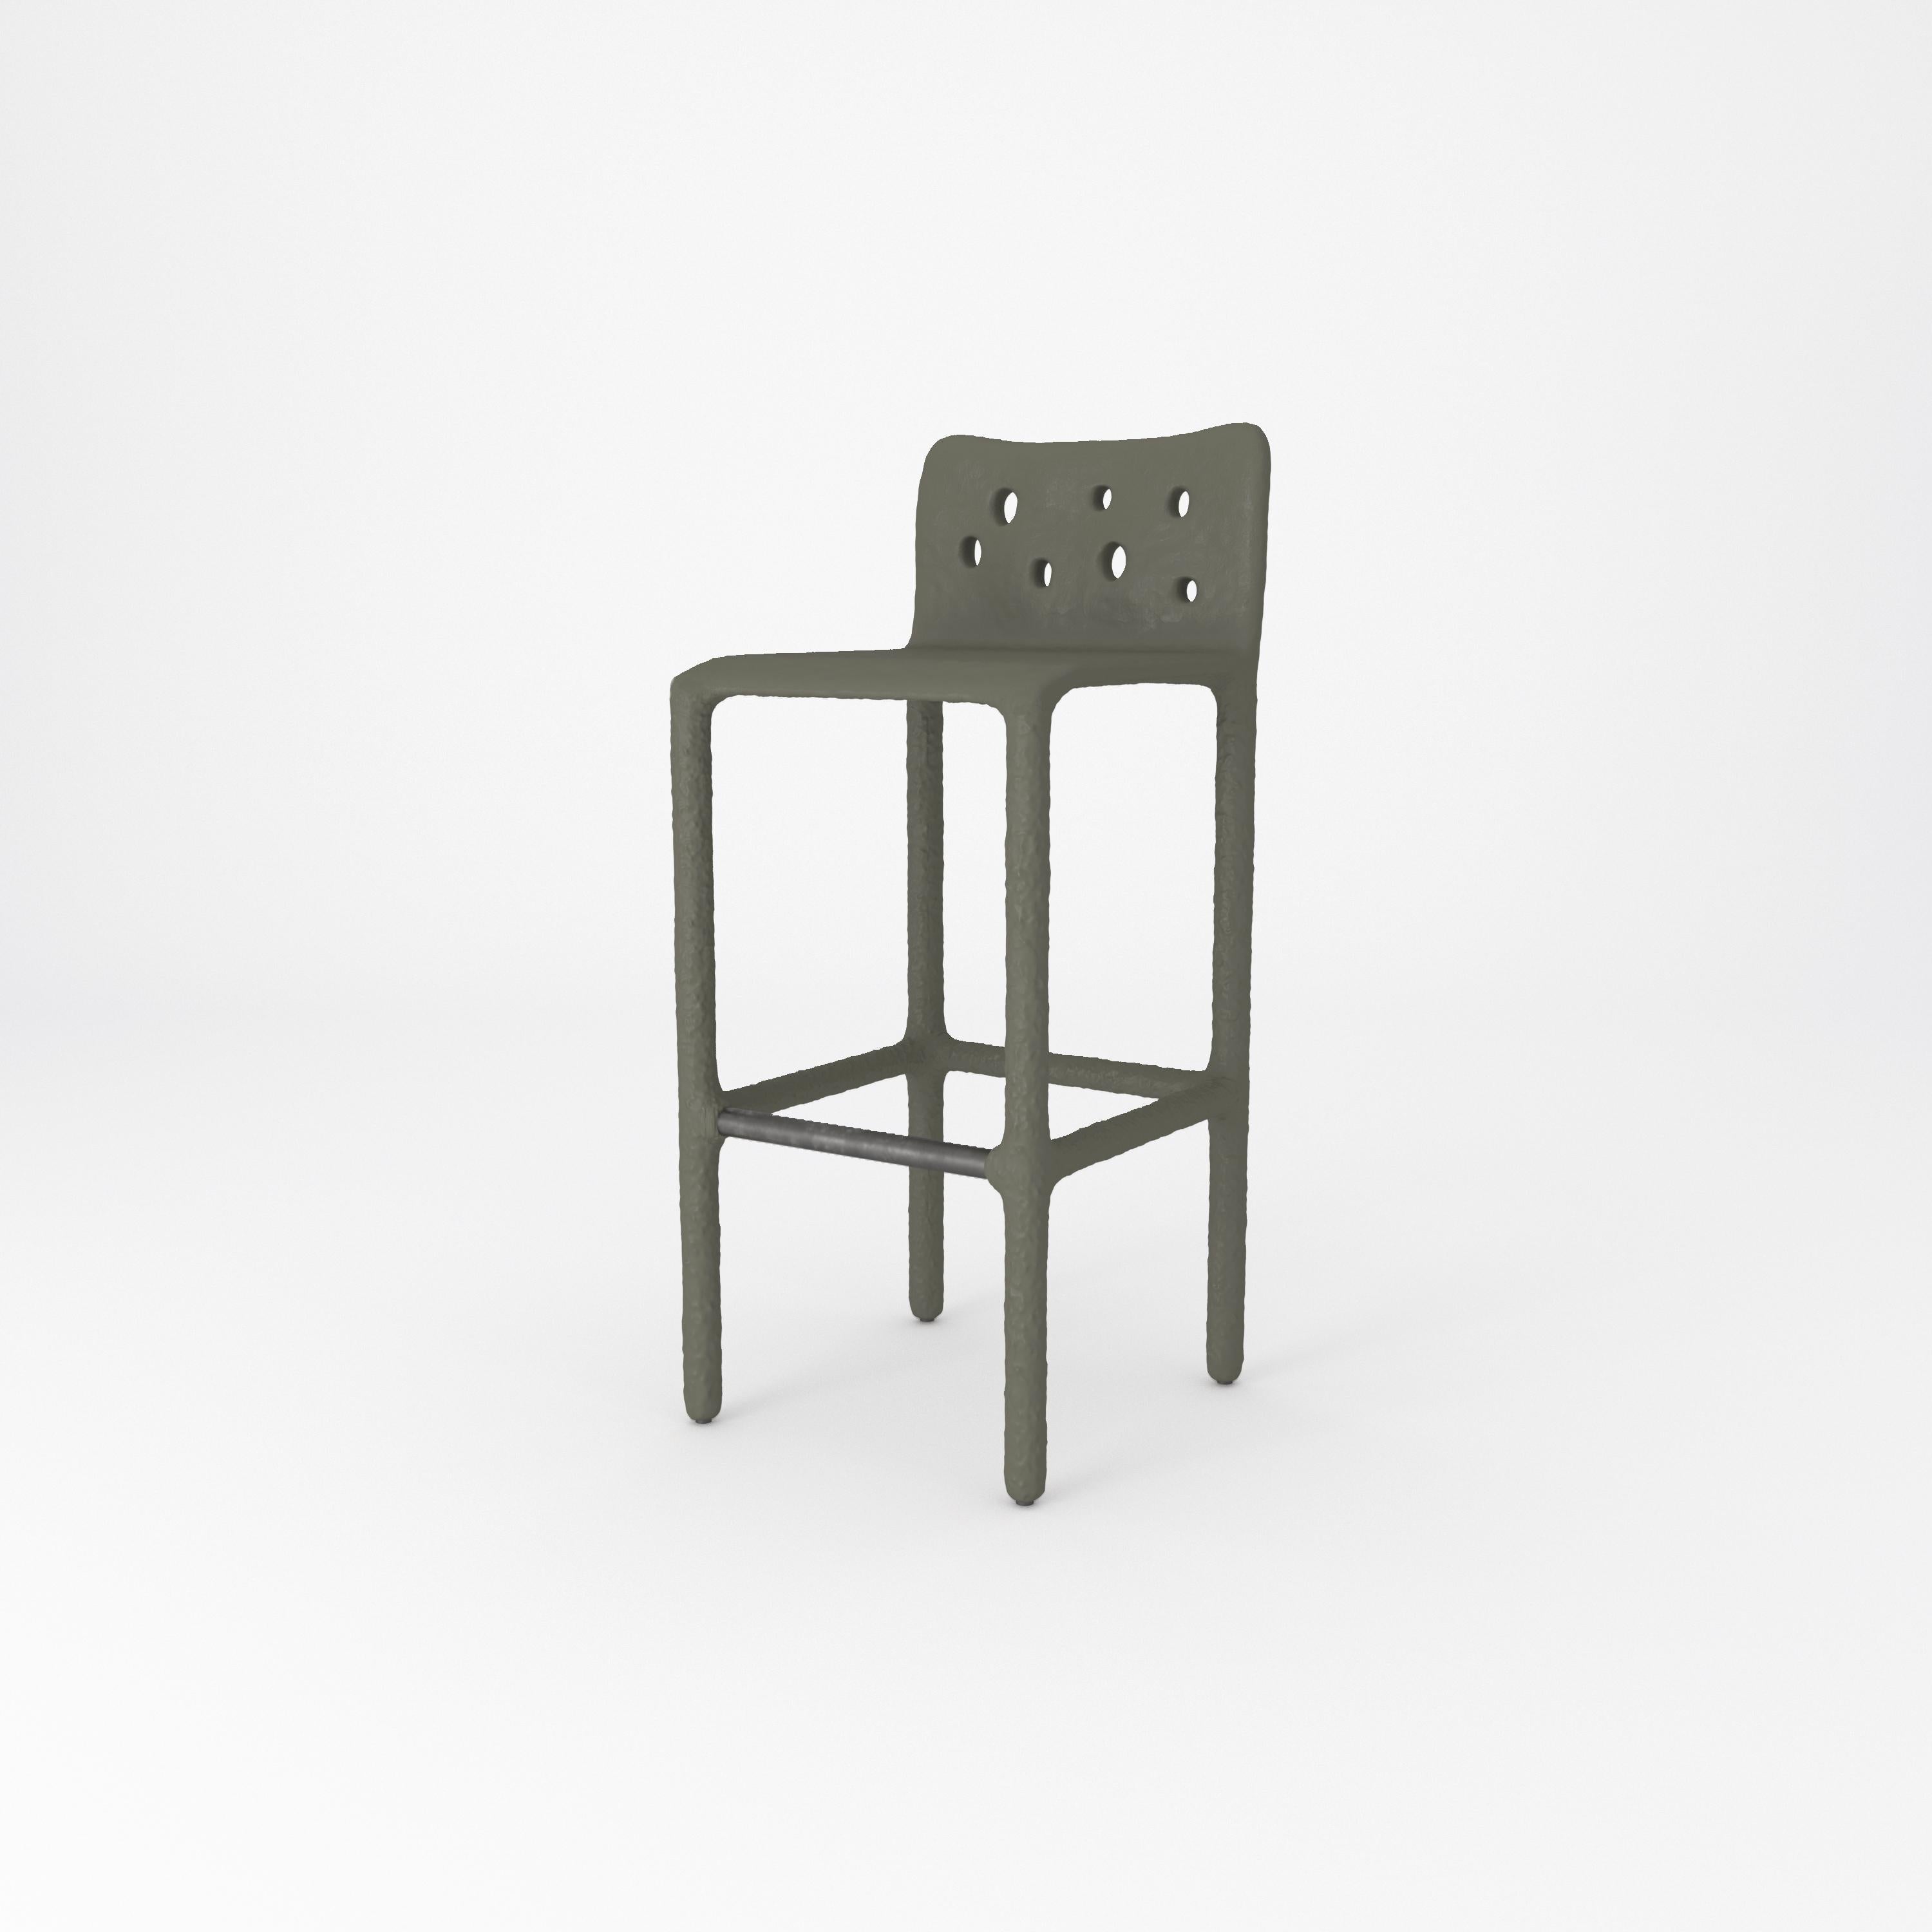 Green Sculpted Contemporary Chair by Faina For Sale 7